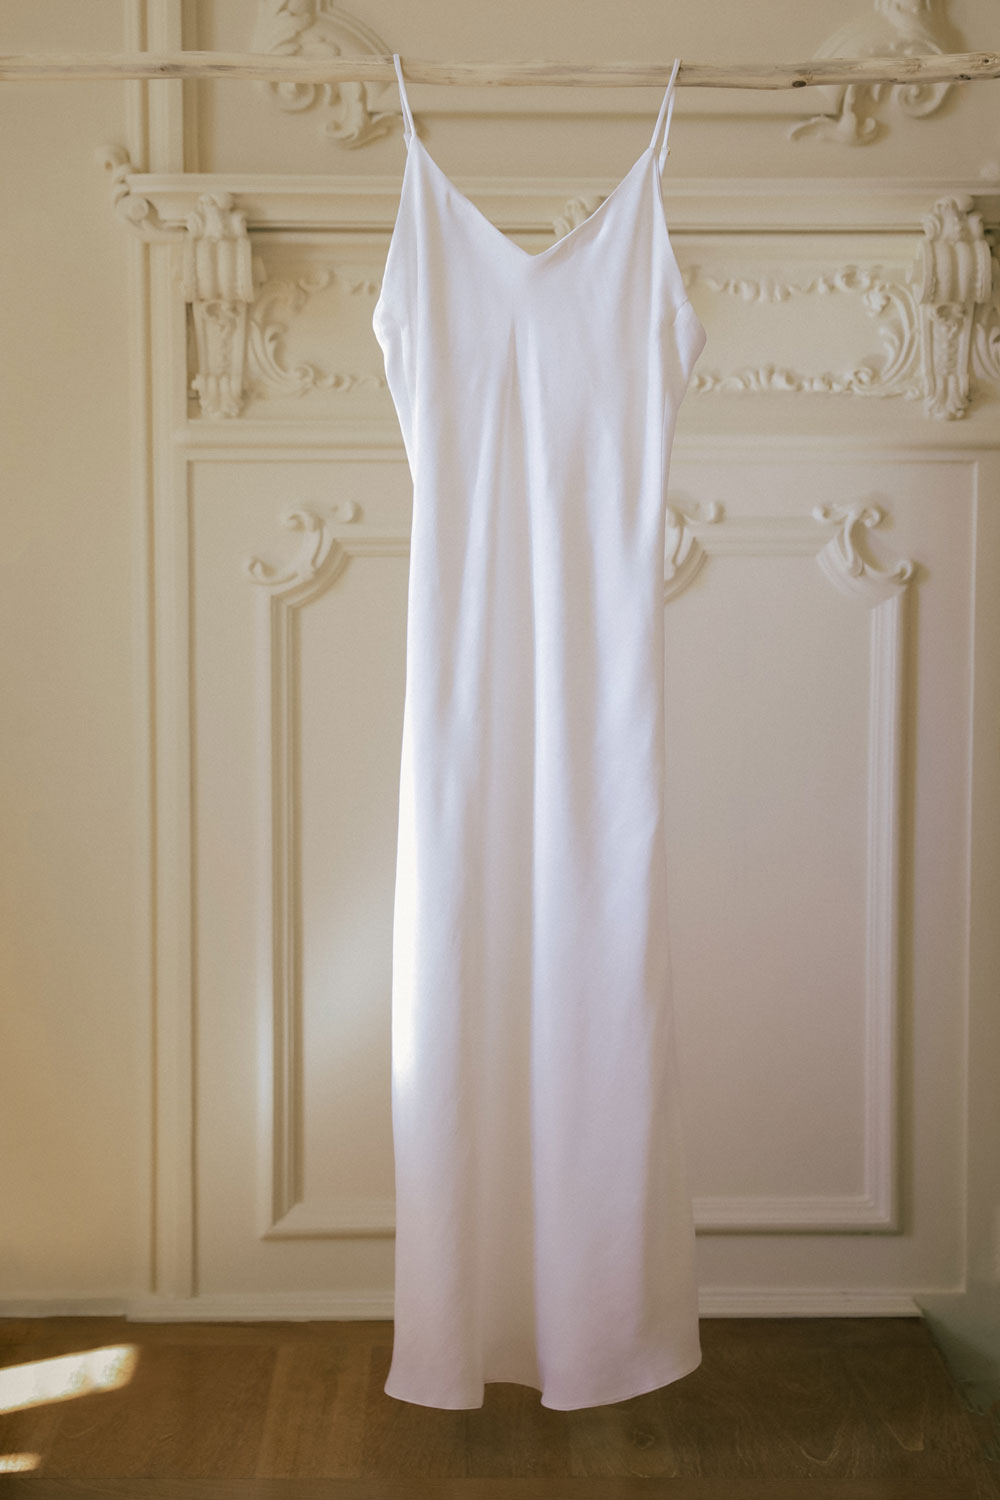 white nightdress in orange silk hanging on a wood stick, seen from the front.